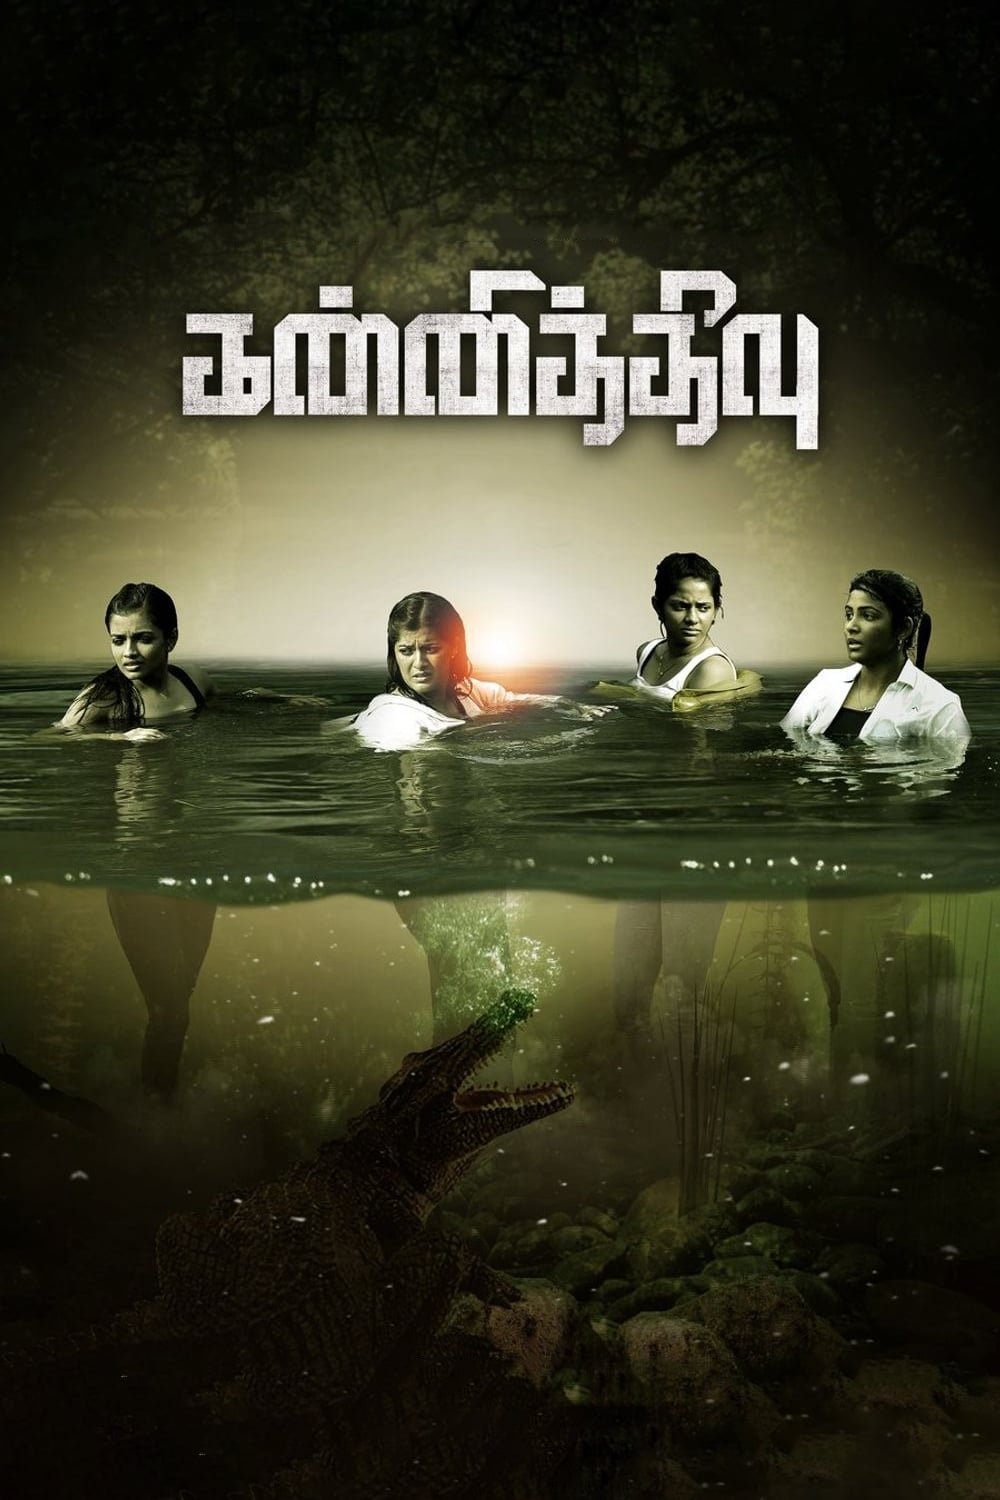 Poster for the movie "Kannitheevu"